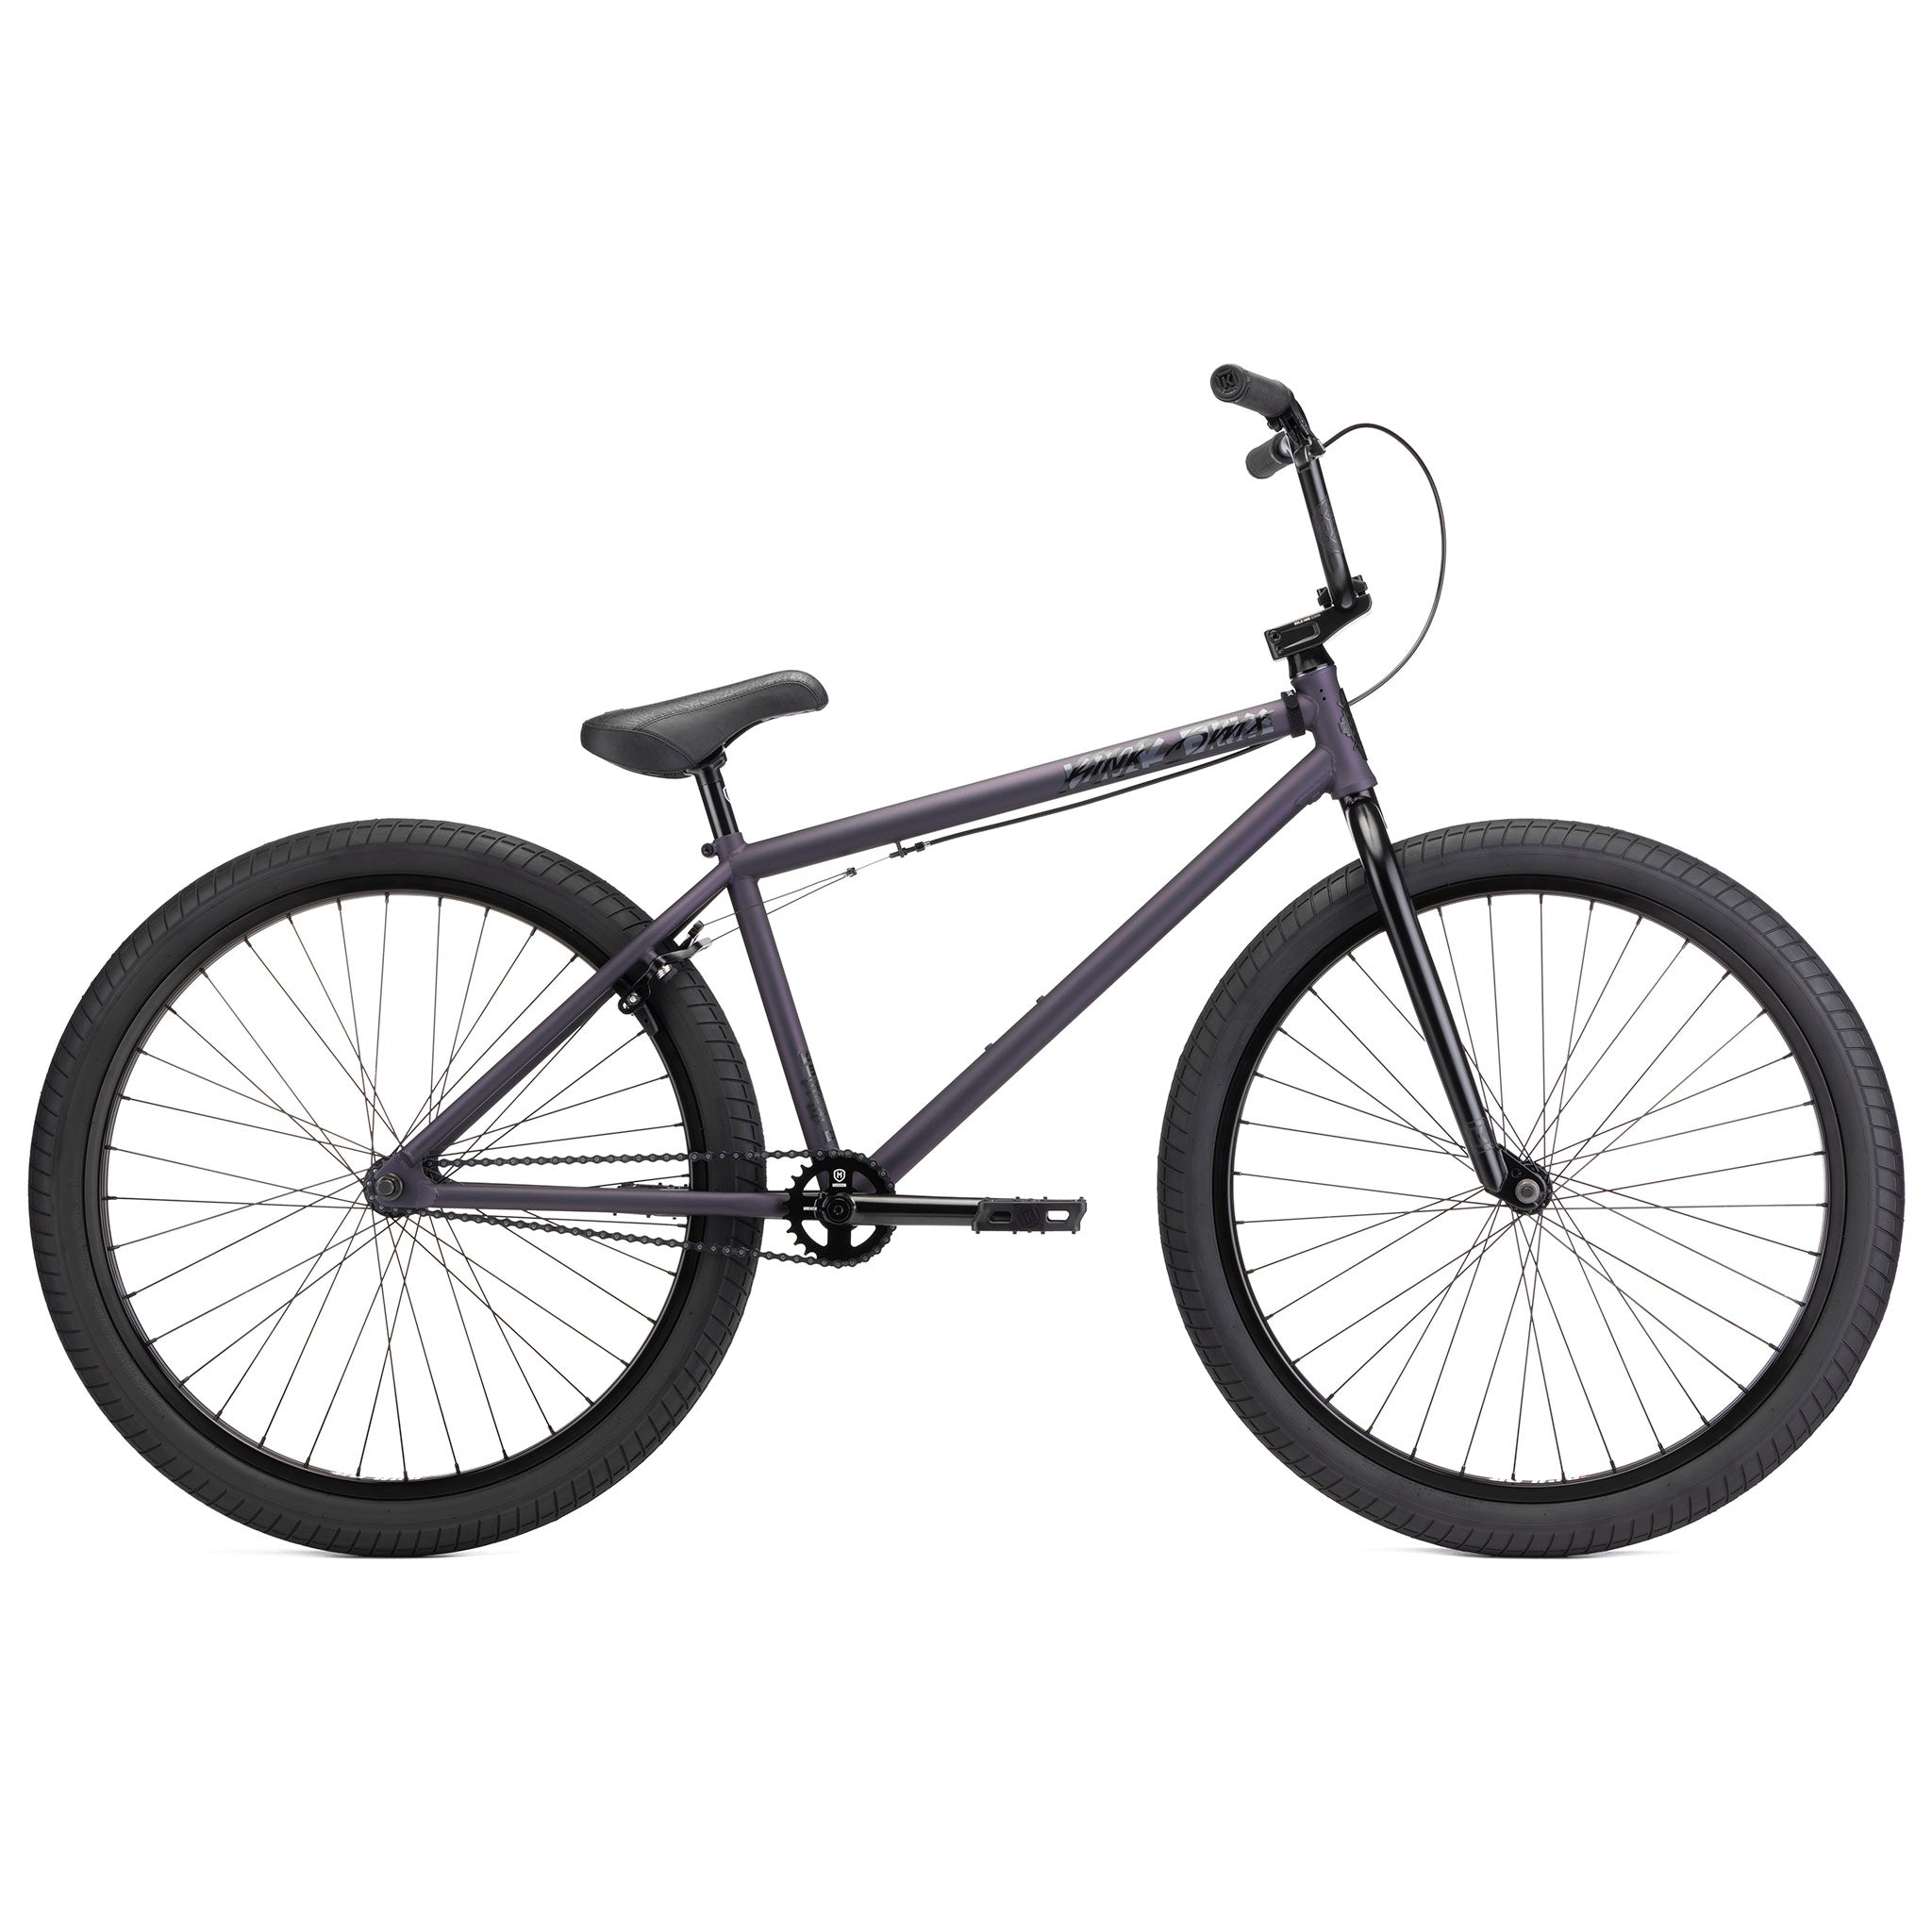 A black Kink Drifter 26 Inch Bike with purple frame and white lettering, displayed in a side profile view on a white background.